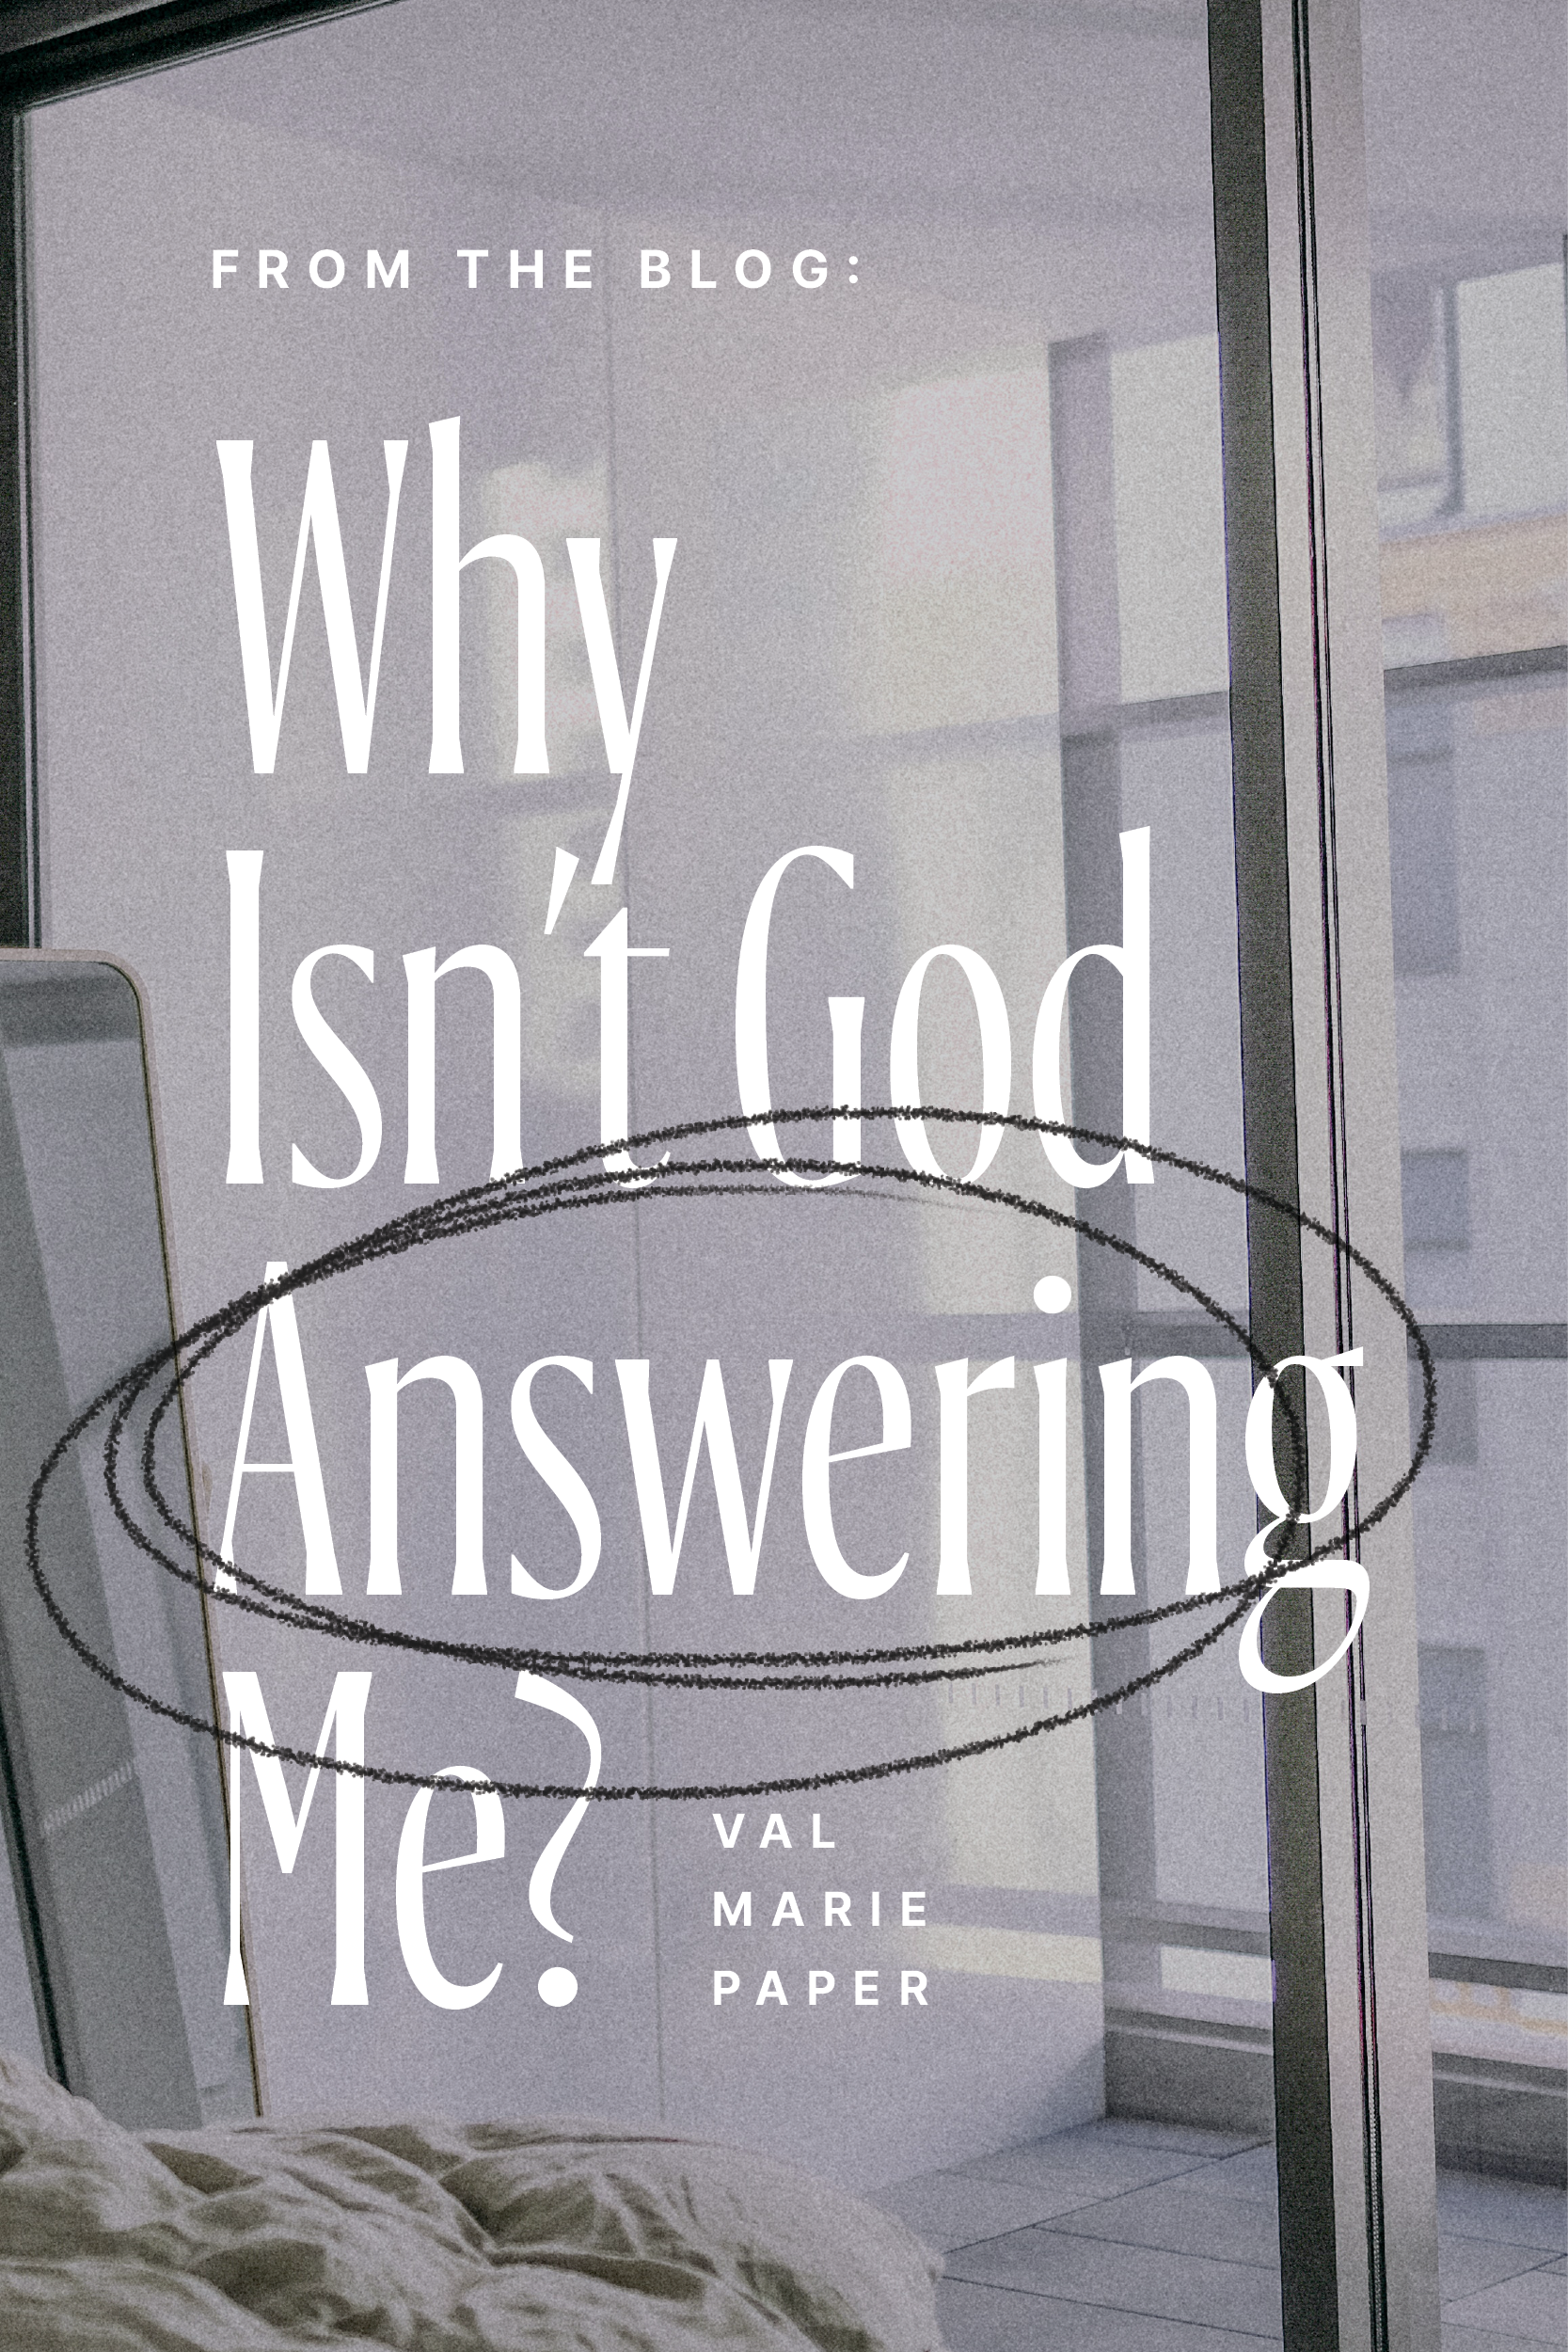 When God says no by Valerie Woerner, prayer journal, women's ministry, prayer, meditation, how to make a prayer journal, prayer warrior, war room, Bible study, tools, prayer notebook, how to pray, distance, distant from God, no, when god says no